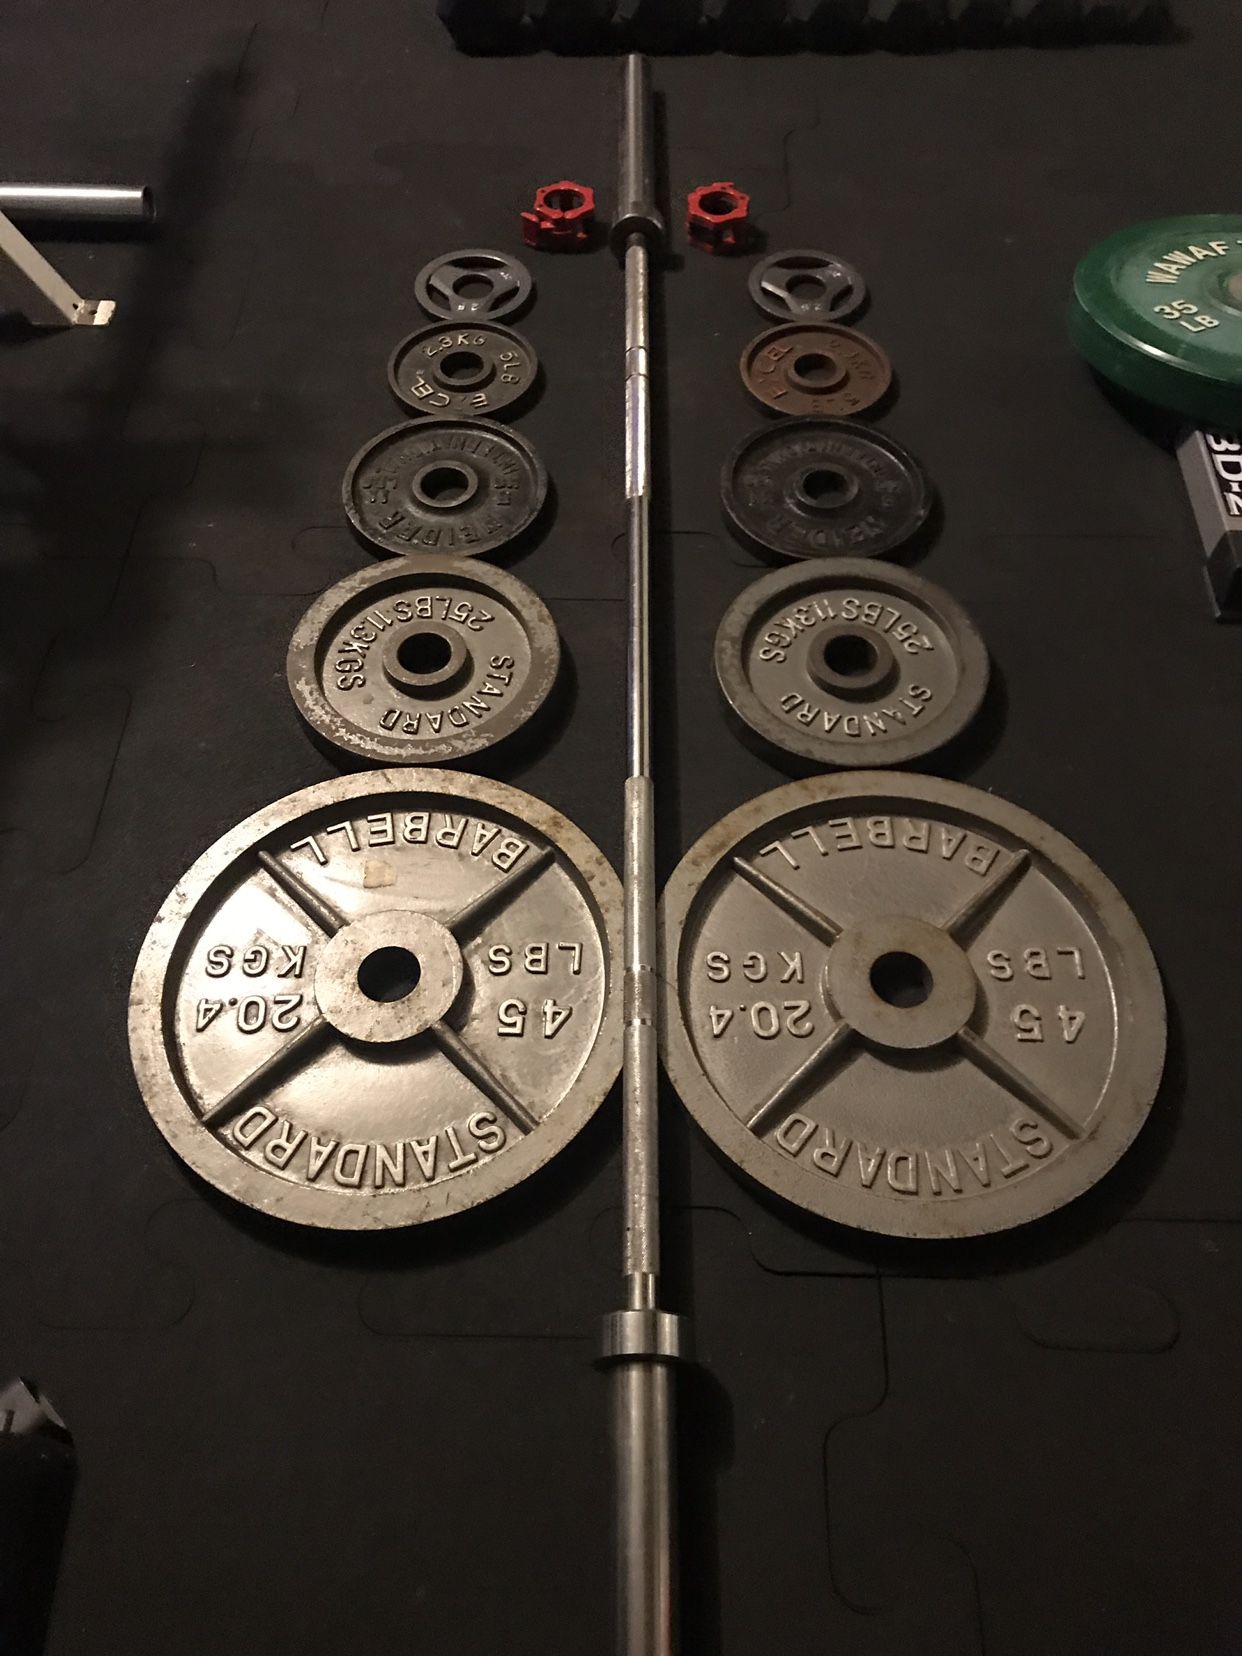 Olympic Weight Plates (2x45Lbs, 2x25Lbs, 2x10Lbs, 2x5Lbs, 2x2.5Lbs) & ETE Olympic Bar (7FT-45LB) with (2) LockJaw for $230 Firm on Price!